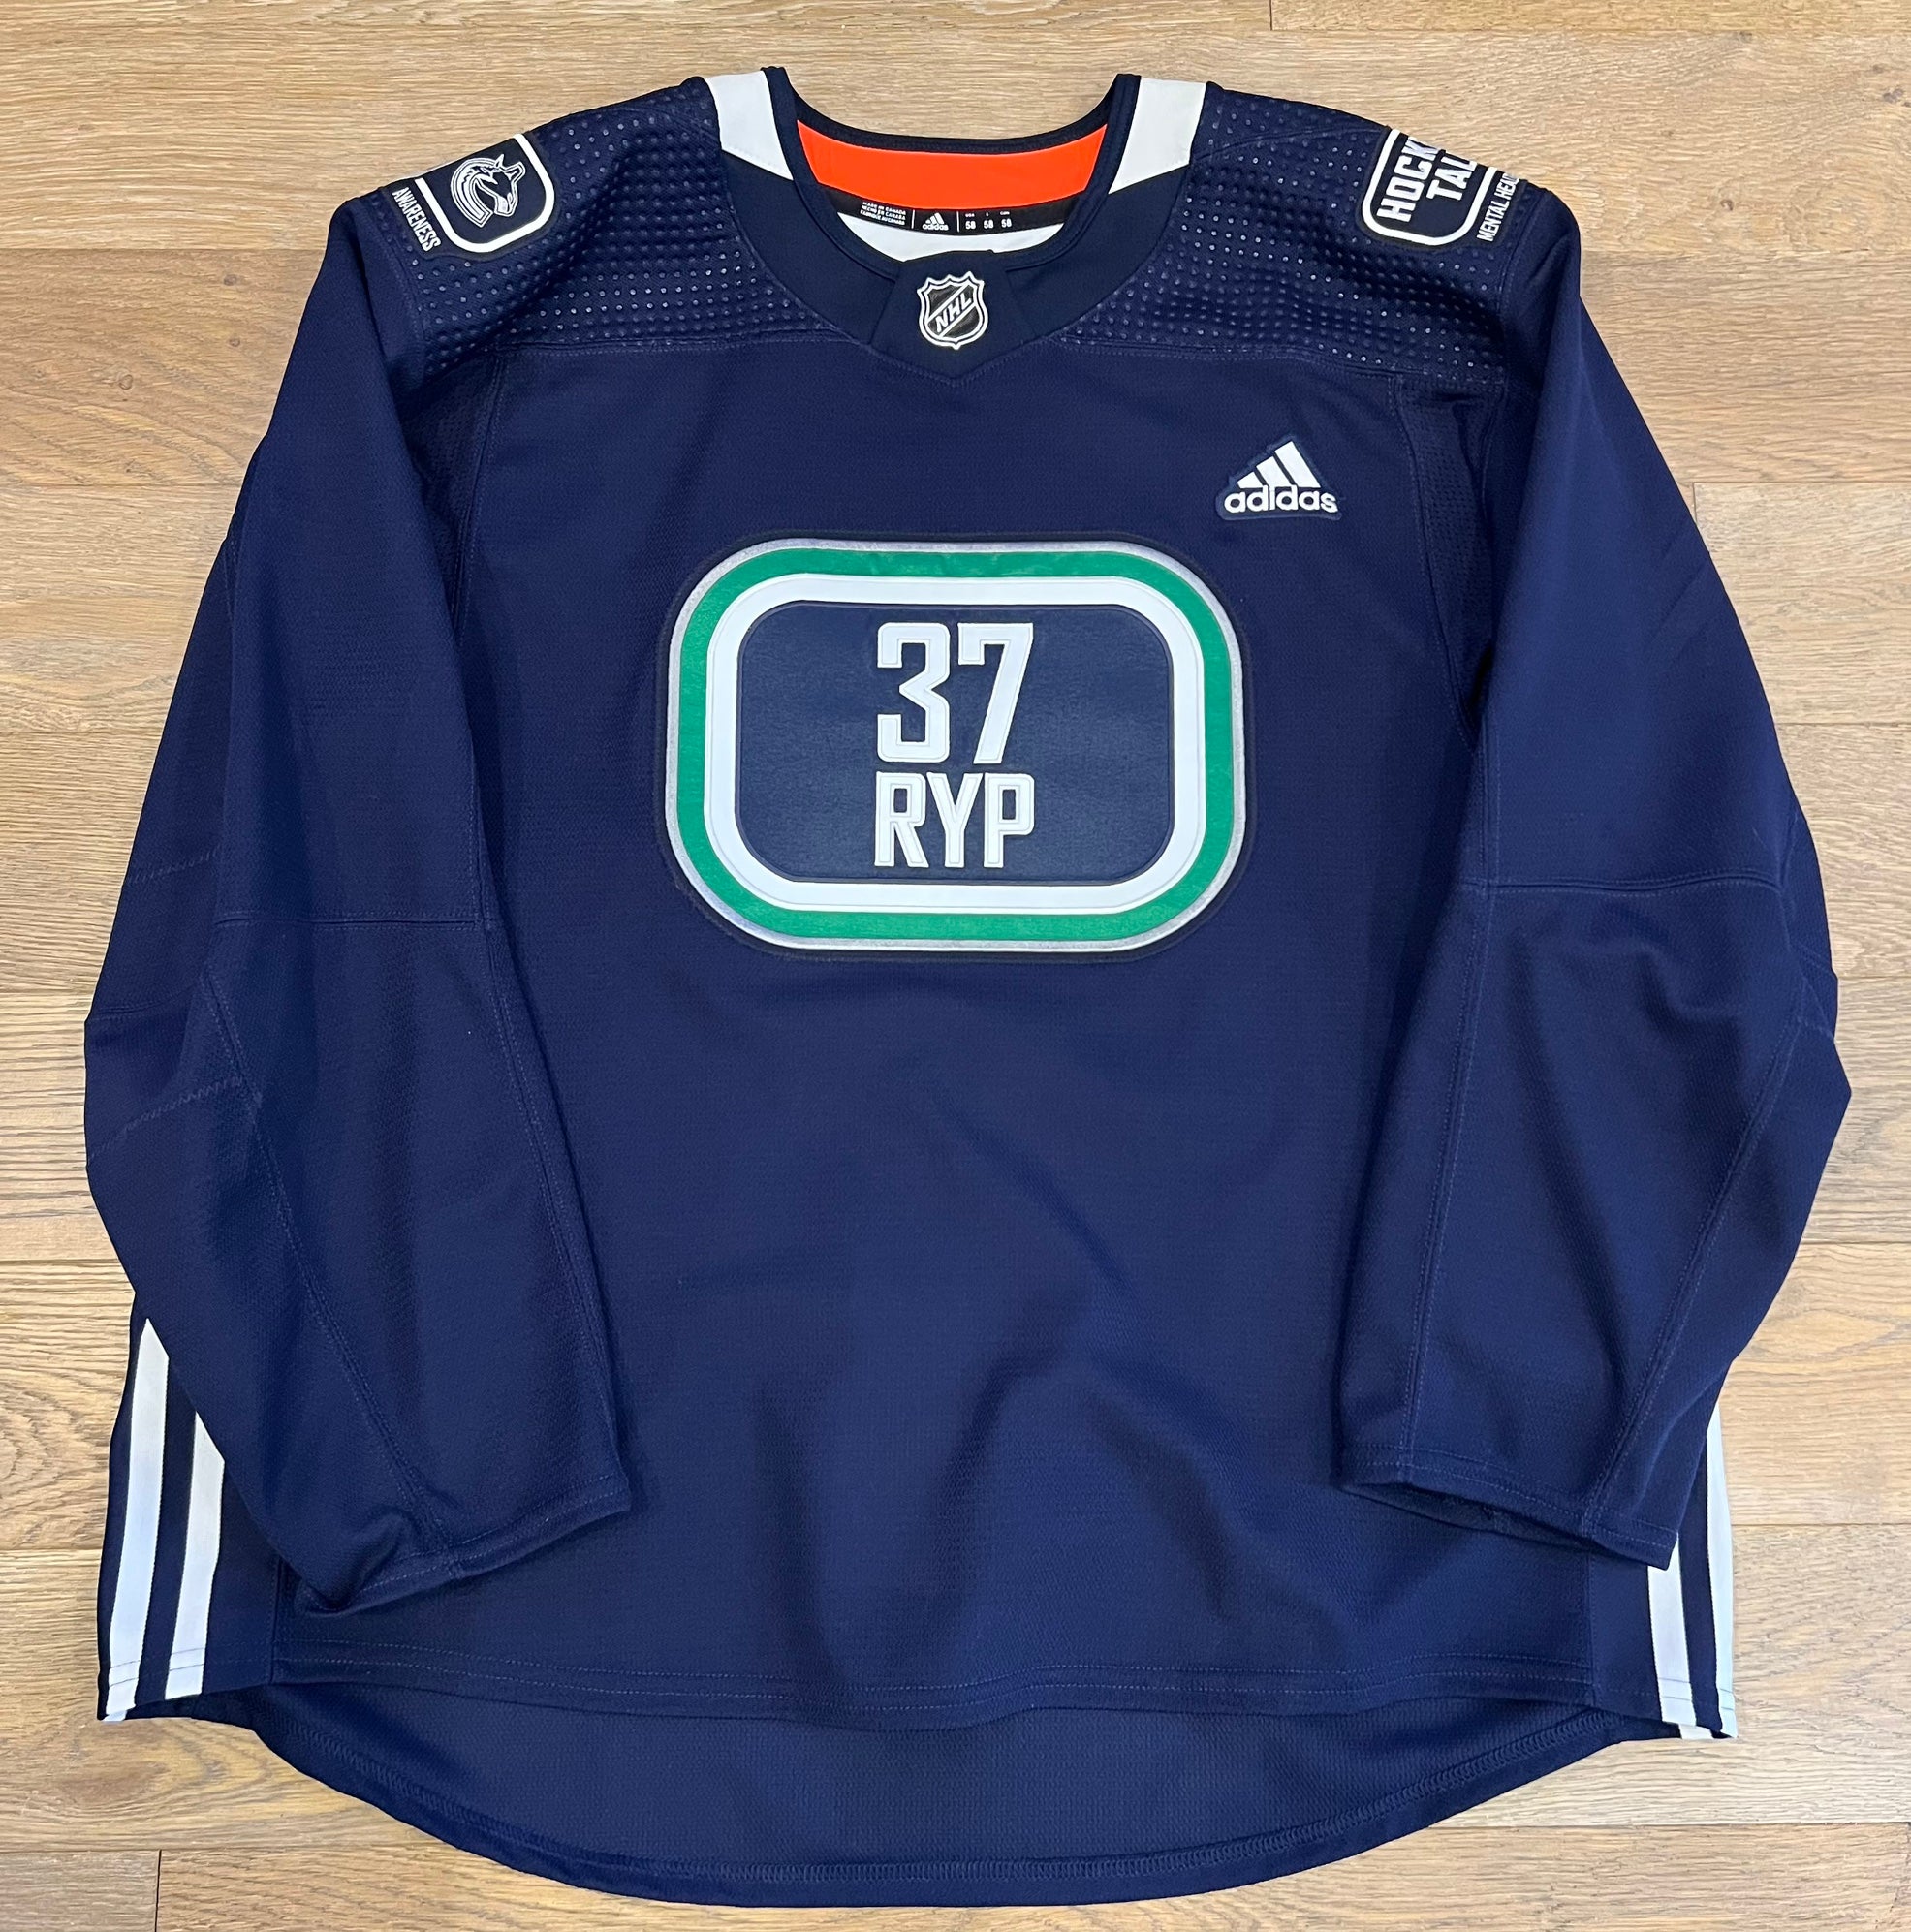 Elias Pettersson Canucks Hockey Fights Cancer Jersey MiC